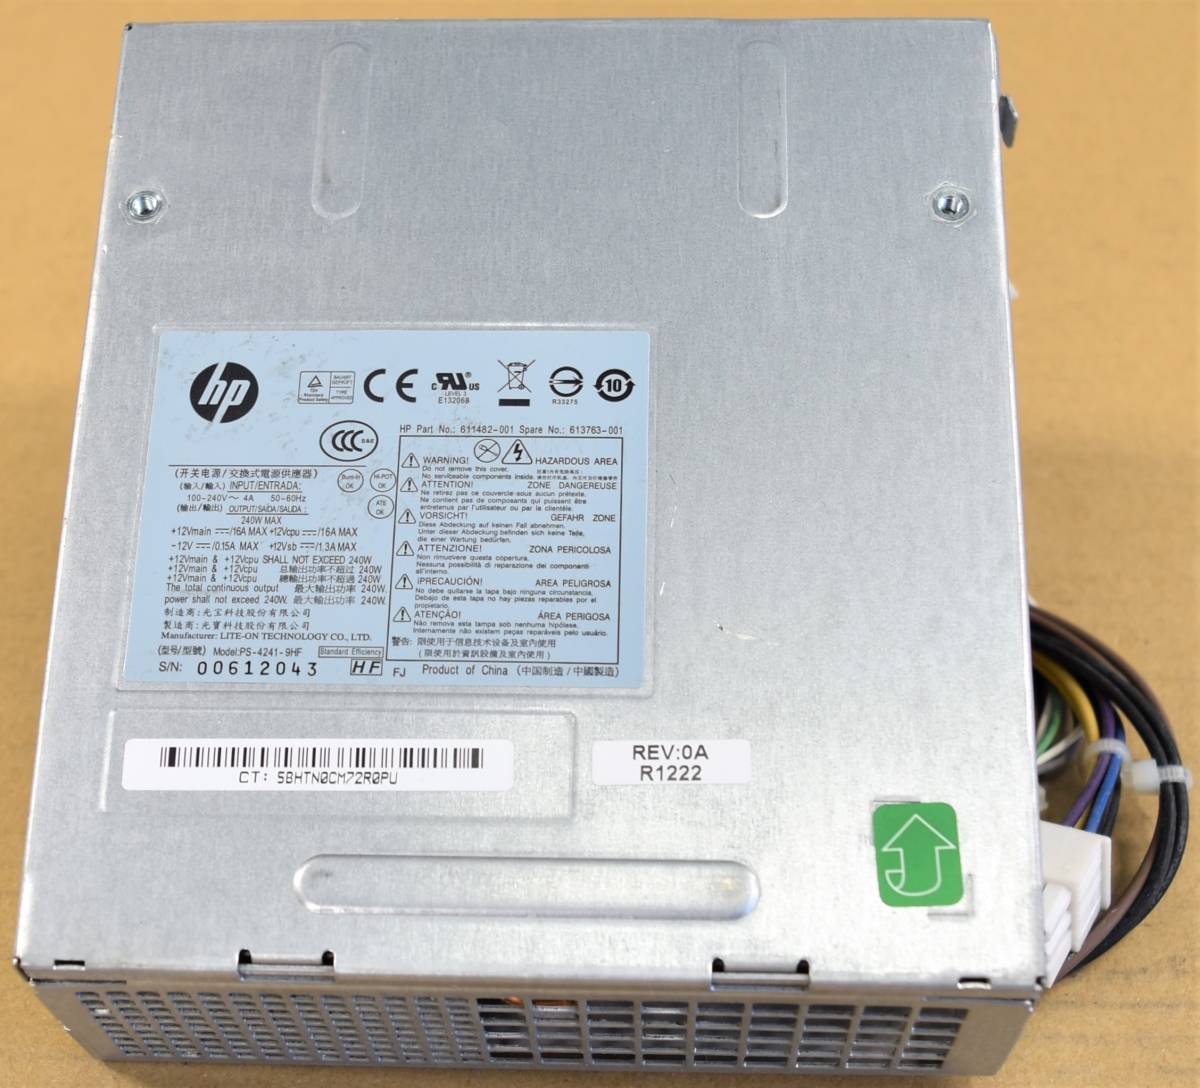  repair for exchange power supply unit HP Compaq 6300 6200 6000 8300 8200 8100 8000 SFF correspondence PS4241-9HF 240W BOX:D